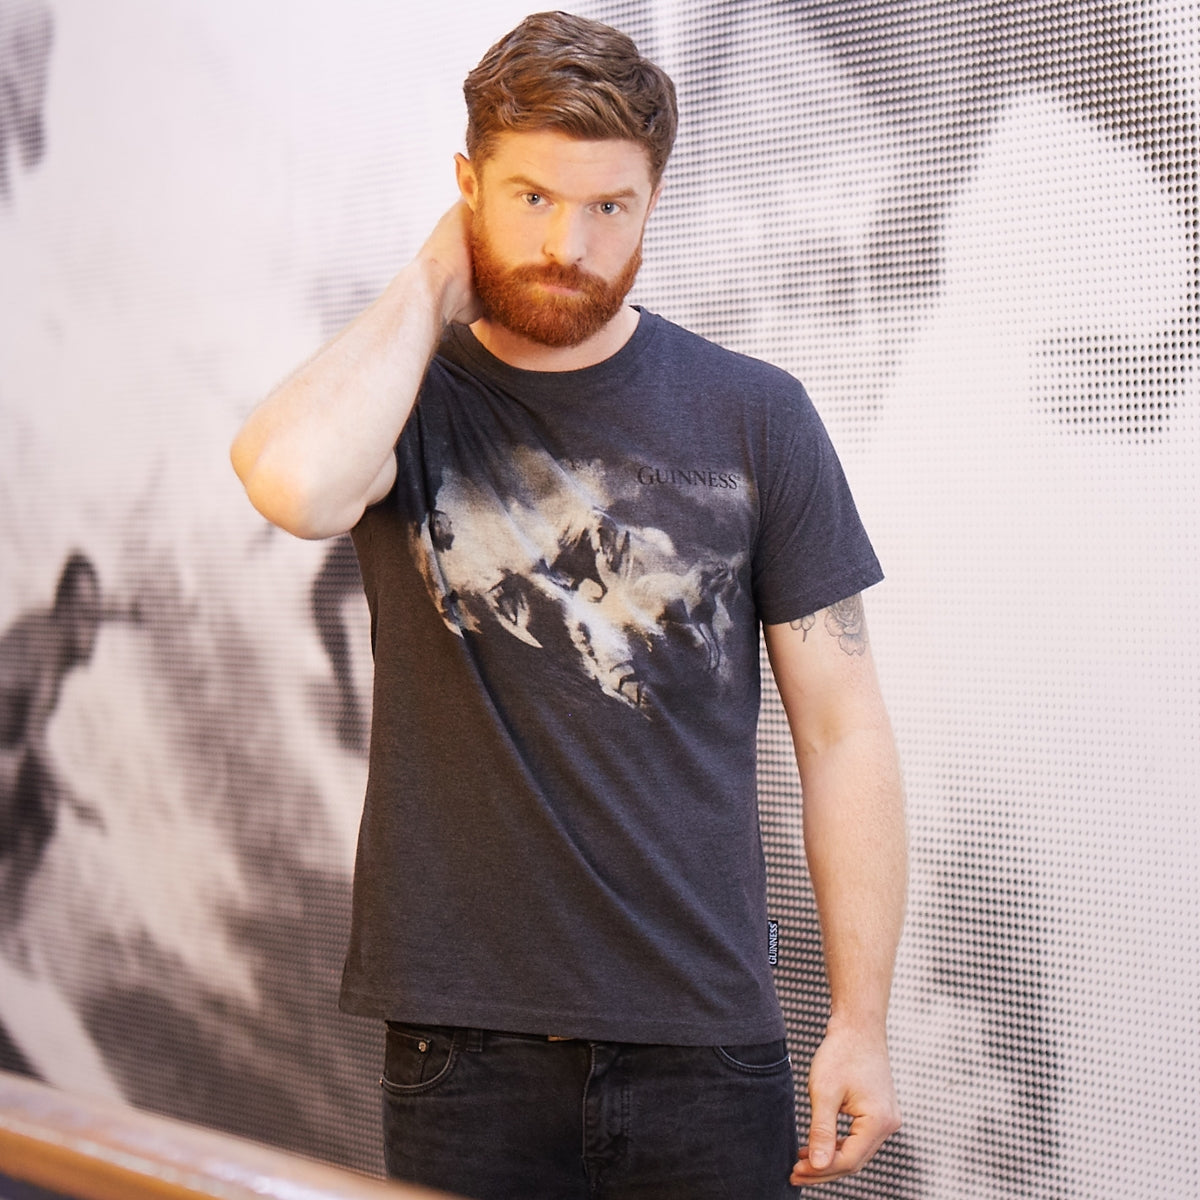 A man wearing a durable Guinness Surf Tee made of a cotton blend fabric.